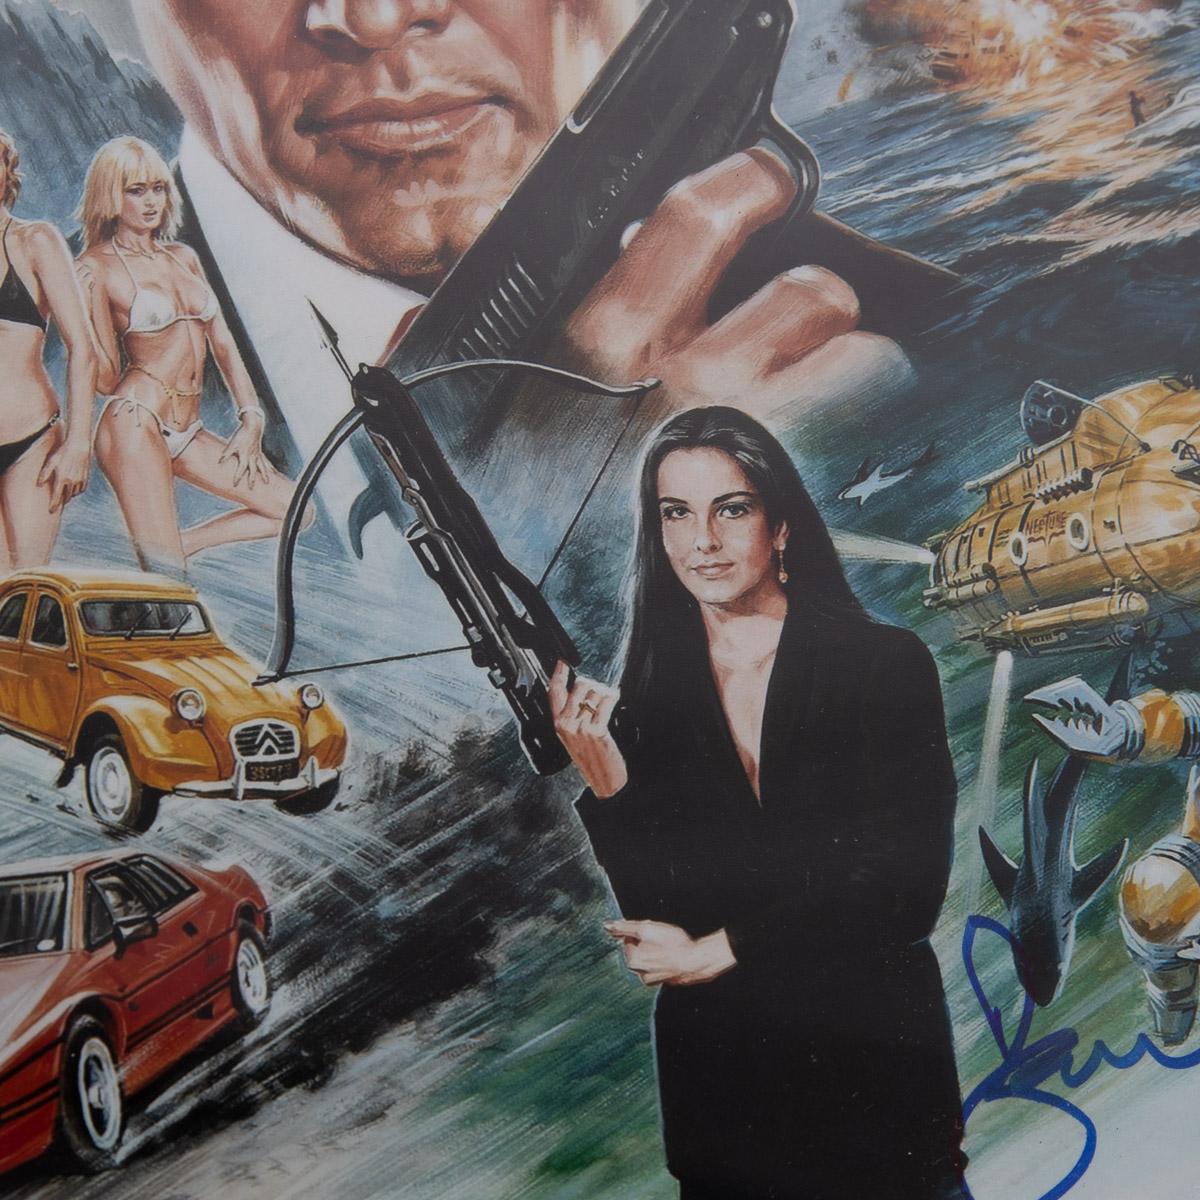 Silver Original Japanese Signed By Roger Moore 'For Your Eyes Only' Mini Poster For Sale